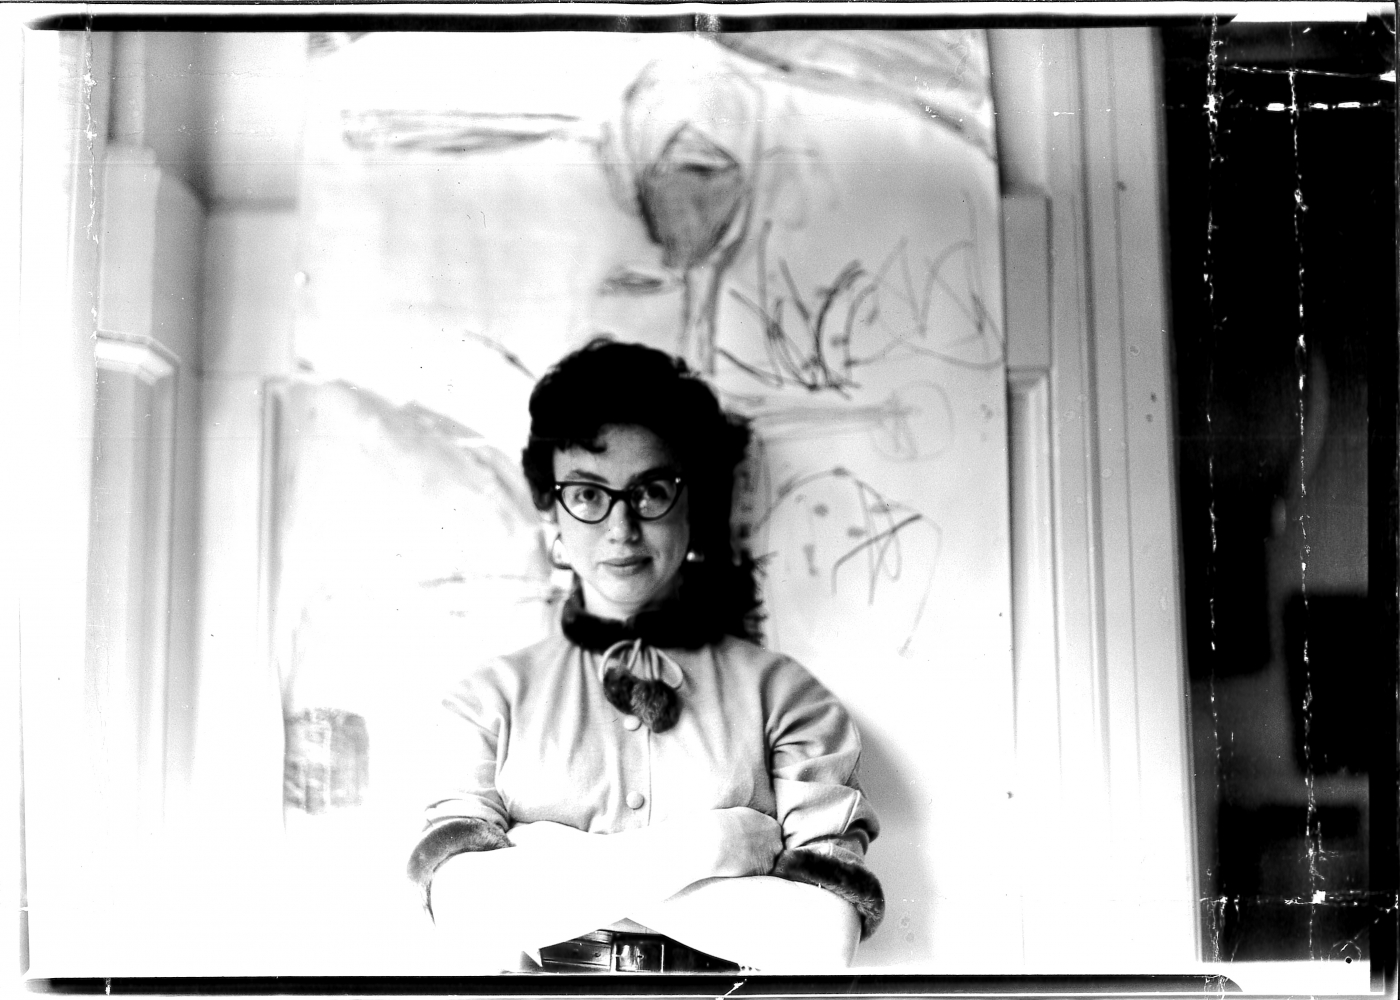 Painter Sonia Gechtoff, c. 1955., Image courtesy the SFAI Archives.